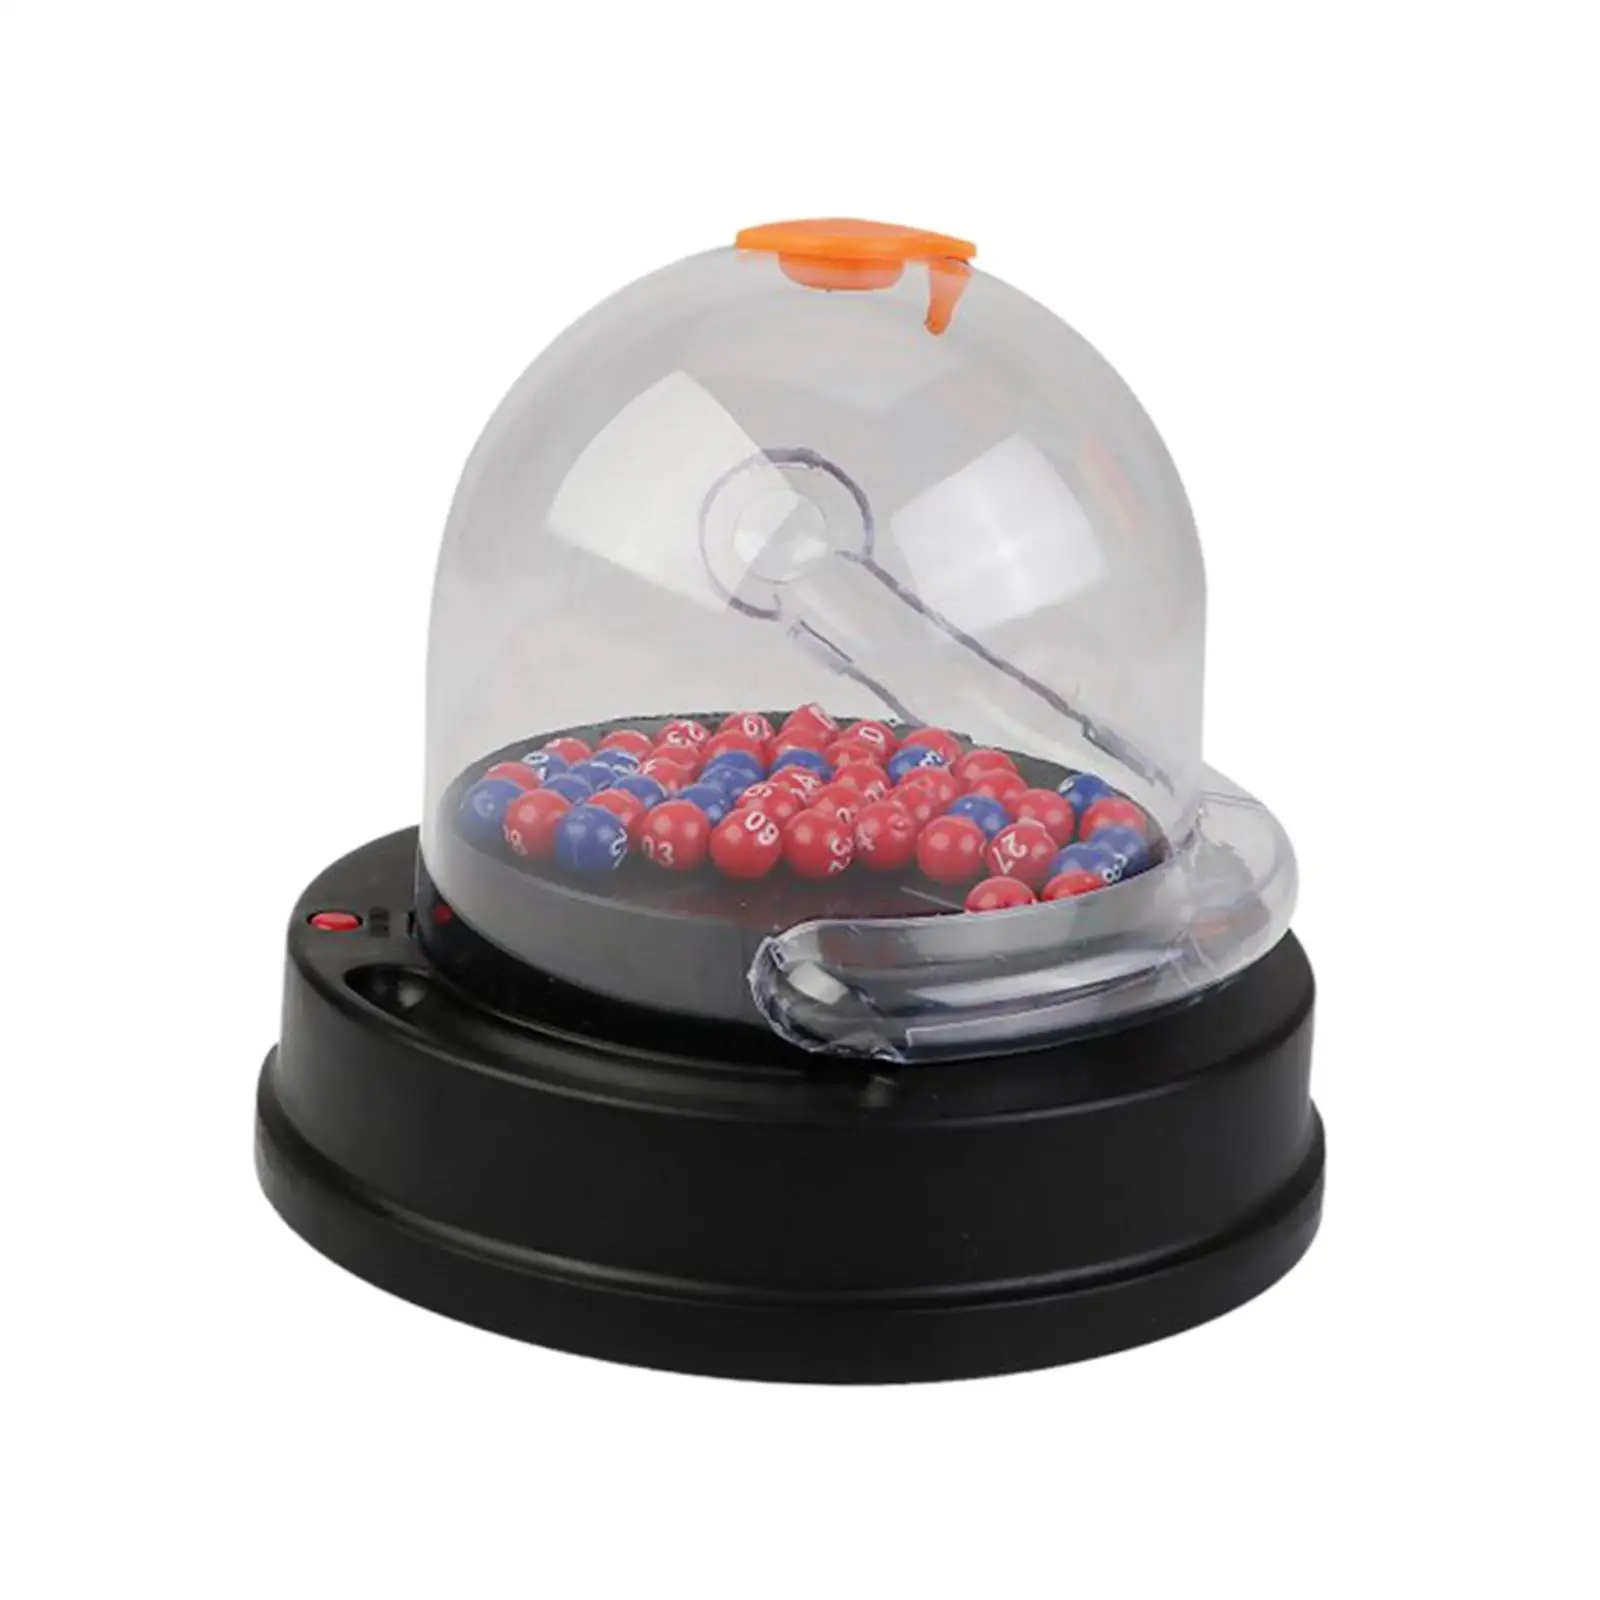 Electric Lottery Toy with Balls Portable Bingo Machine Cage Game Number Picking Machine for Dancehall Karaoke Sweepstakes